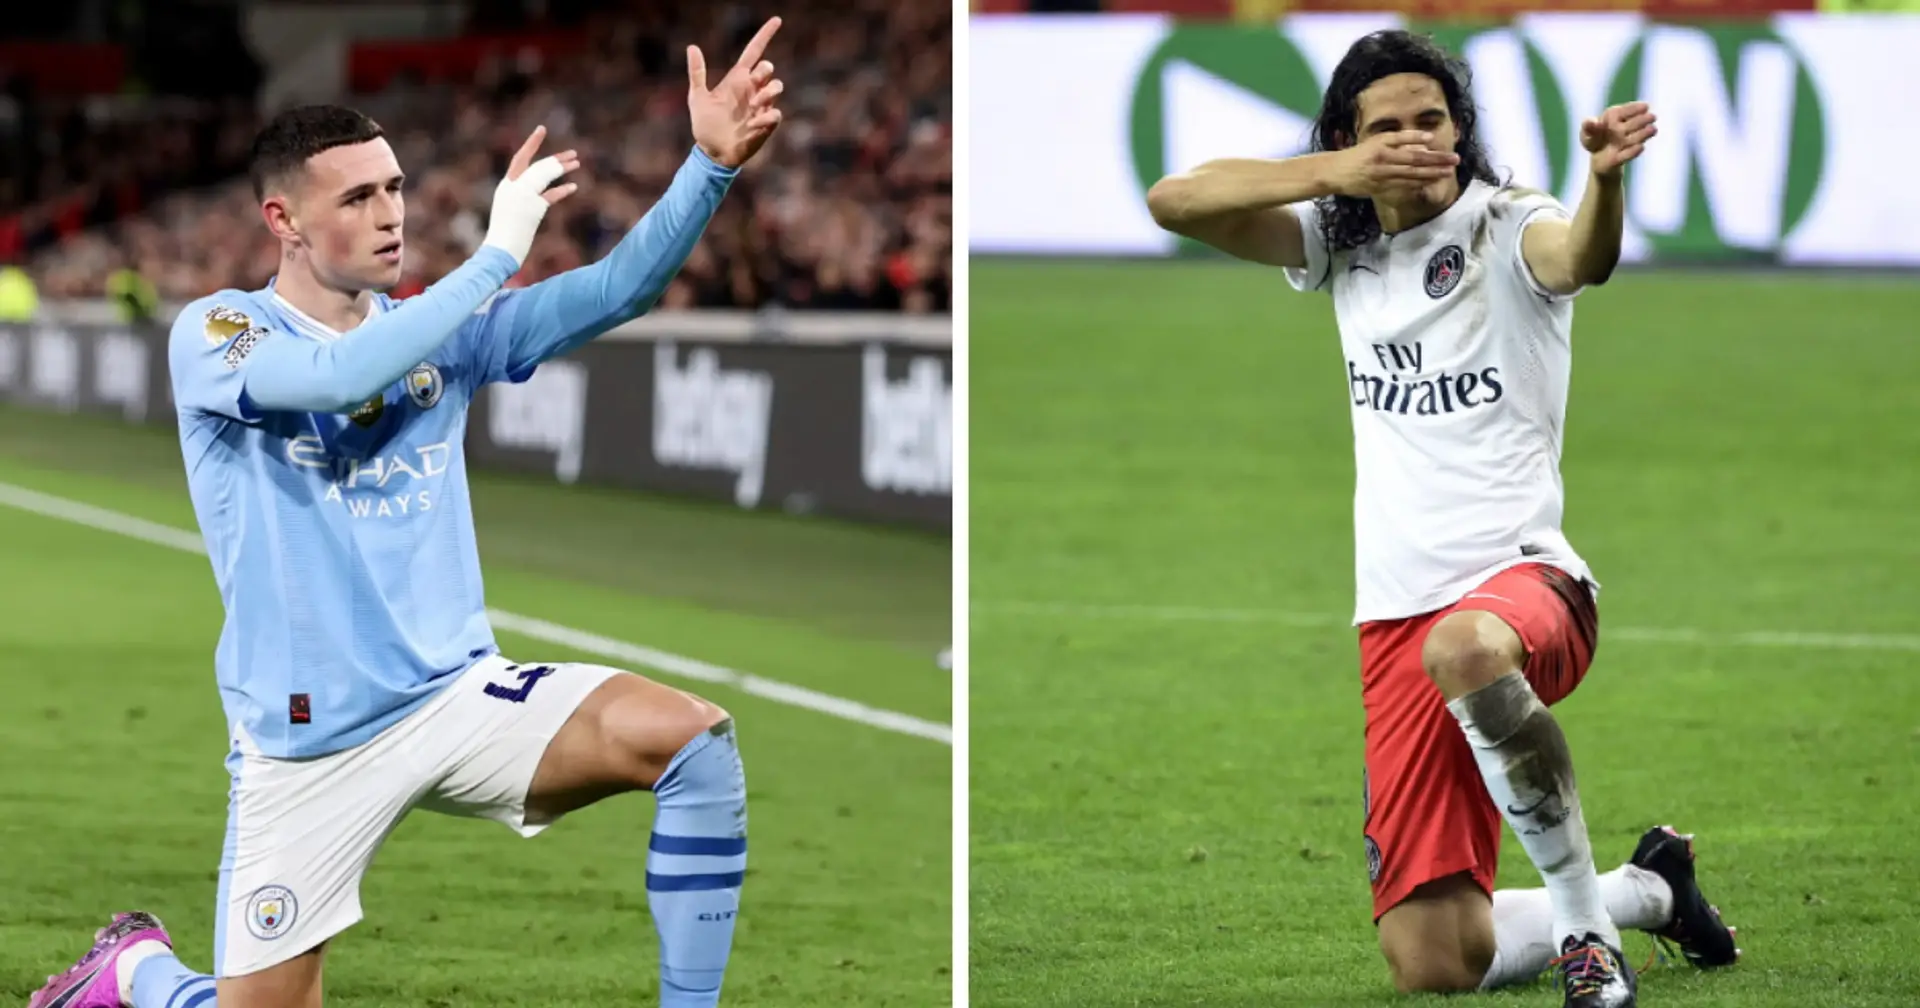 Phil Foden reveals the meaning behind his celebration that could land him in trouble as Edinson Cavani found out